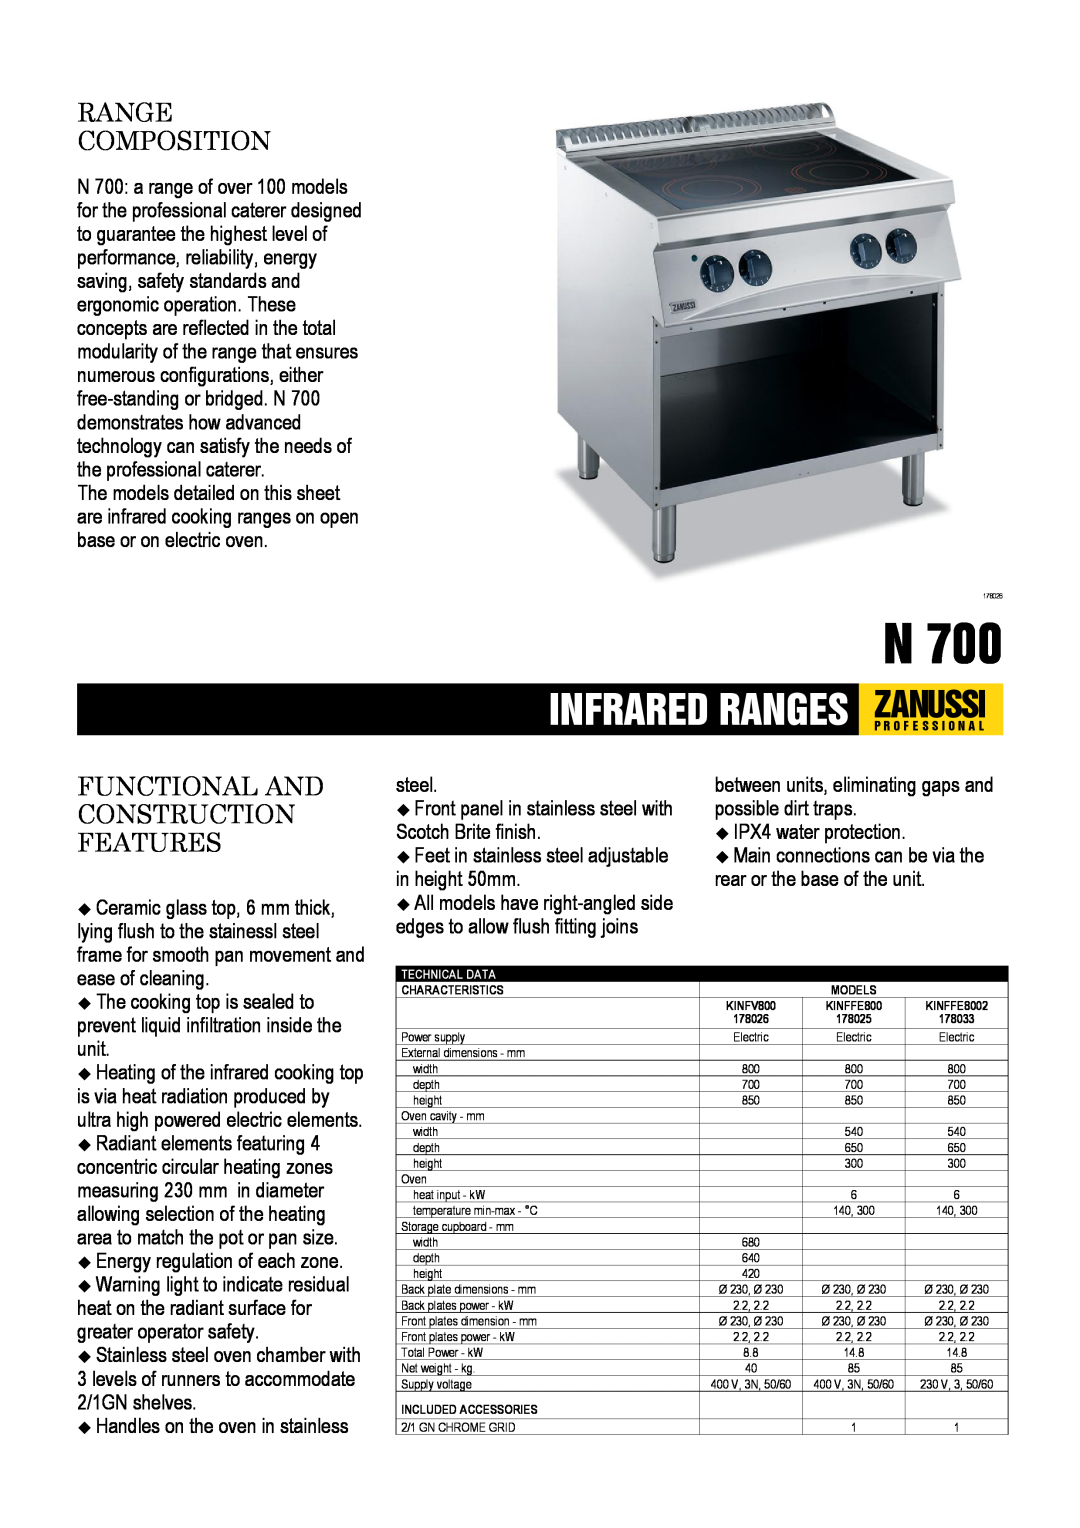 Zanussi KINFV800, KINFFE8002, 178025, 178033, 178026 dimensions Range Composition, Functional And Construction Features 